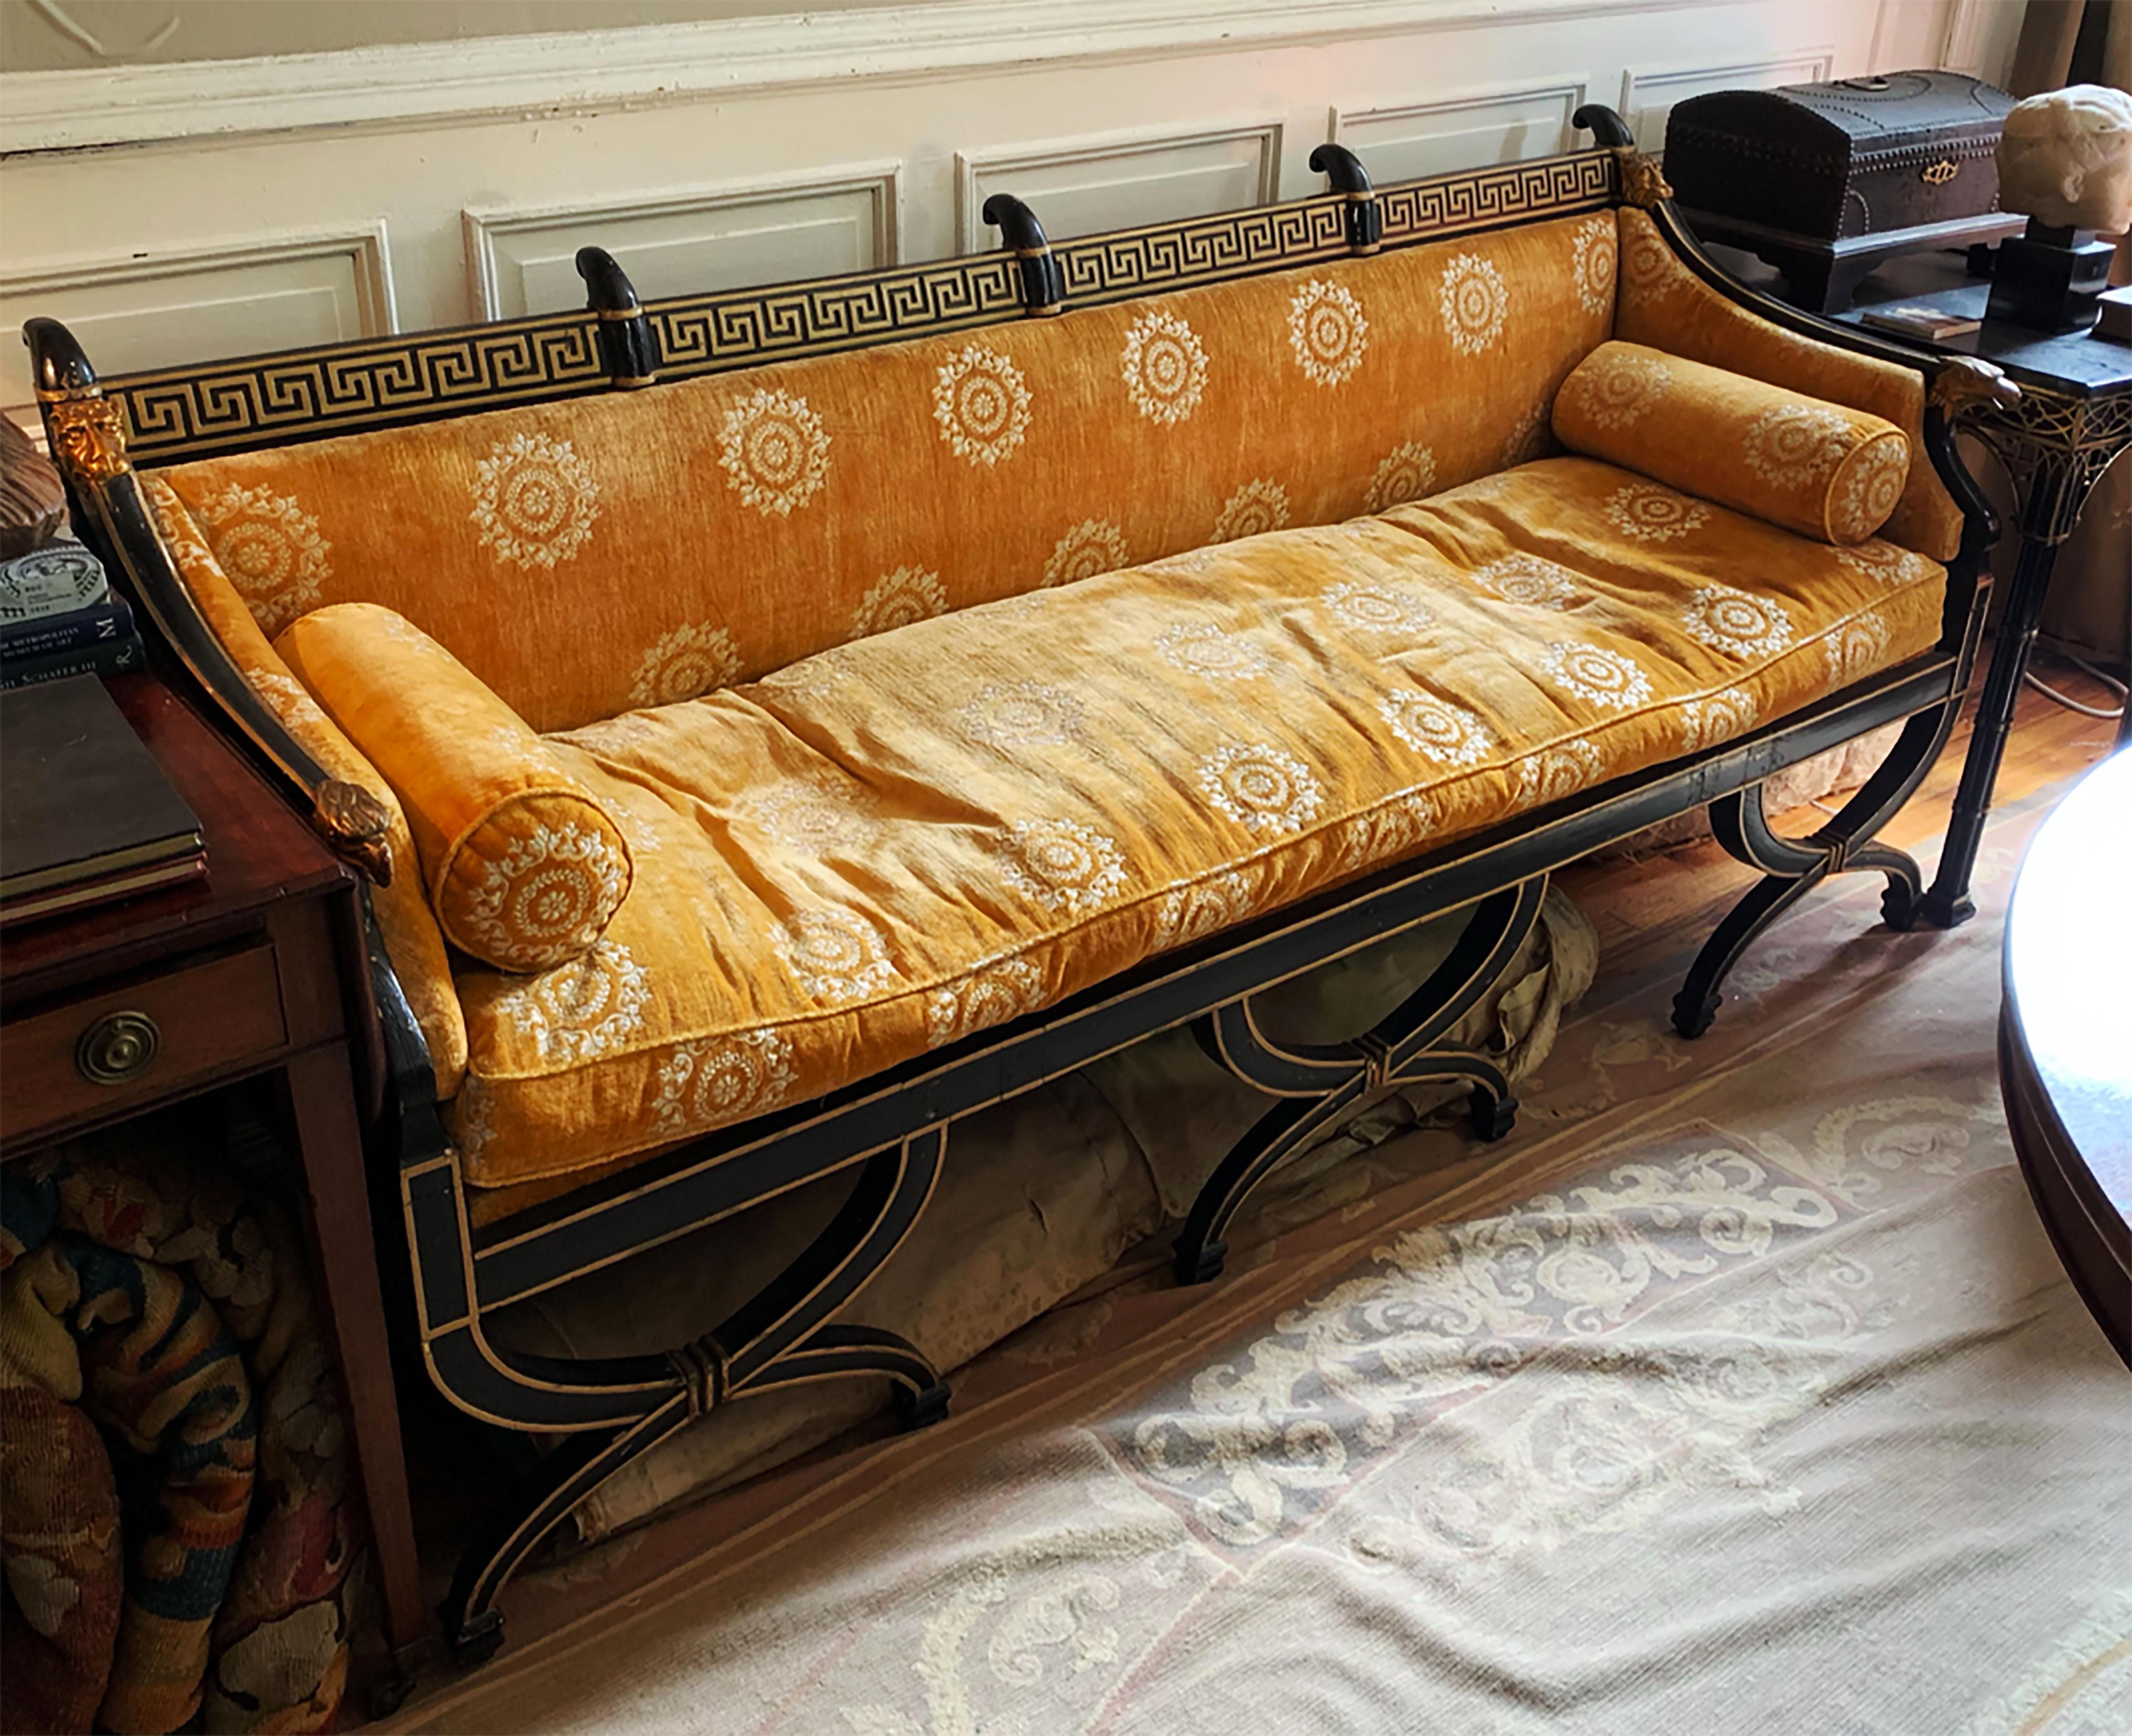 An outstanding Regency sofa in neoclassical taste. The couch is supported by Curule form legs with gilt edges. The arms of the piece exhibit eagle armrests and lion masks. The headrail is decorated with a bold Greek key meander. The whole is